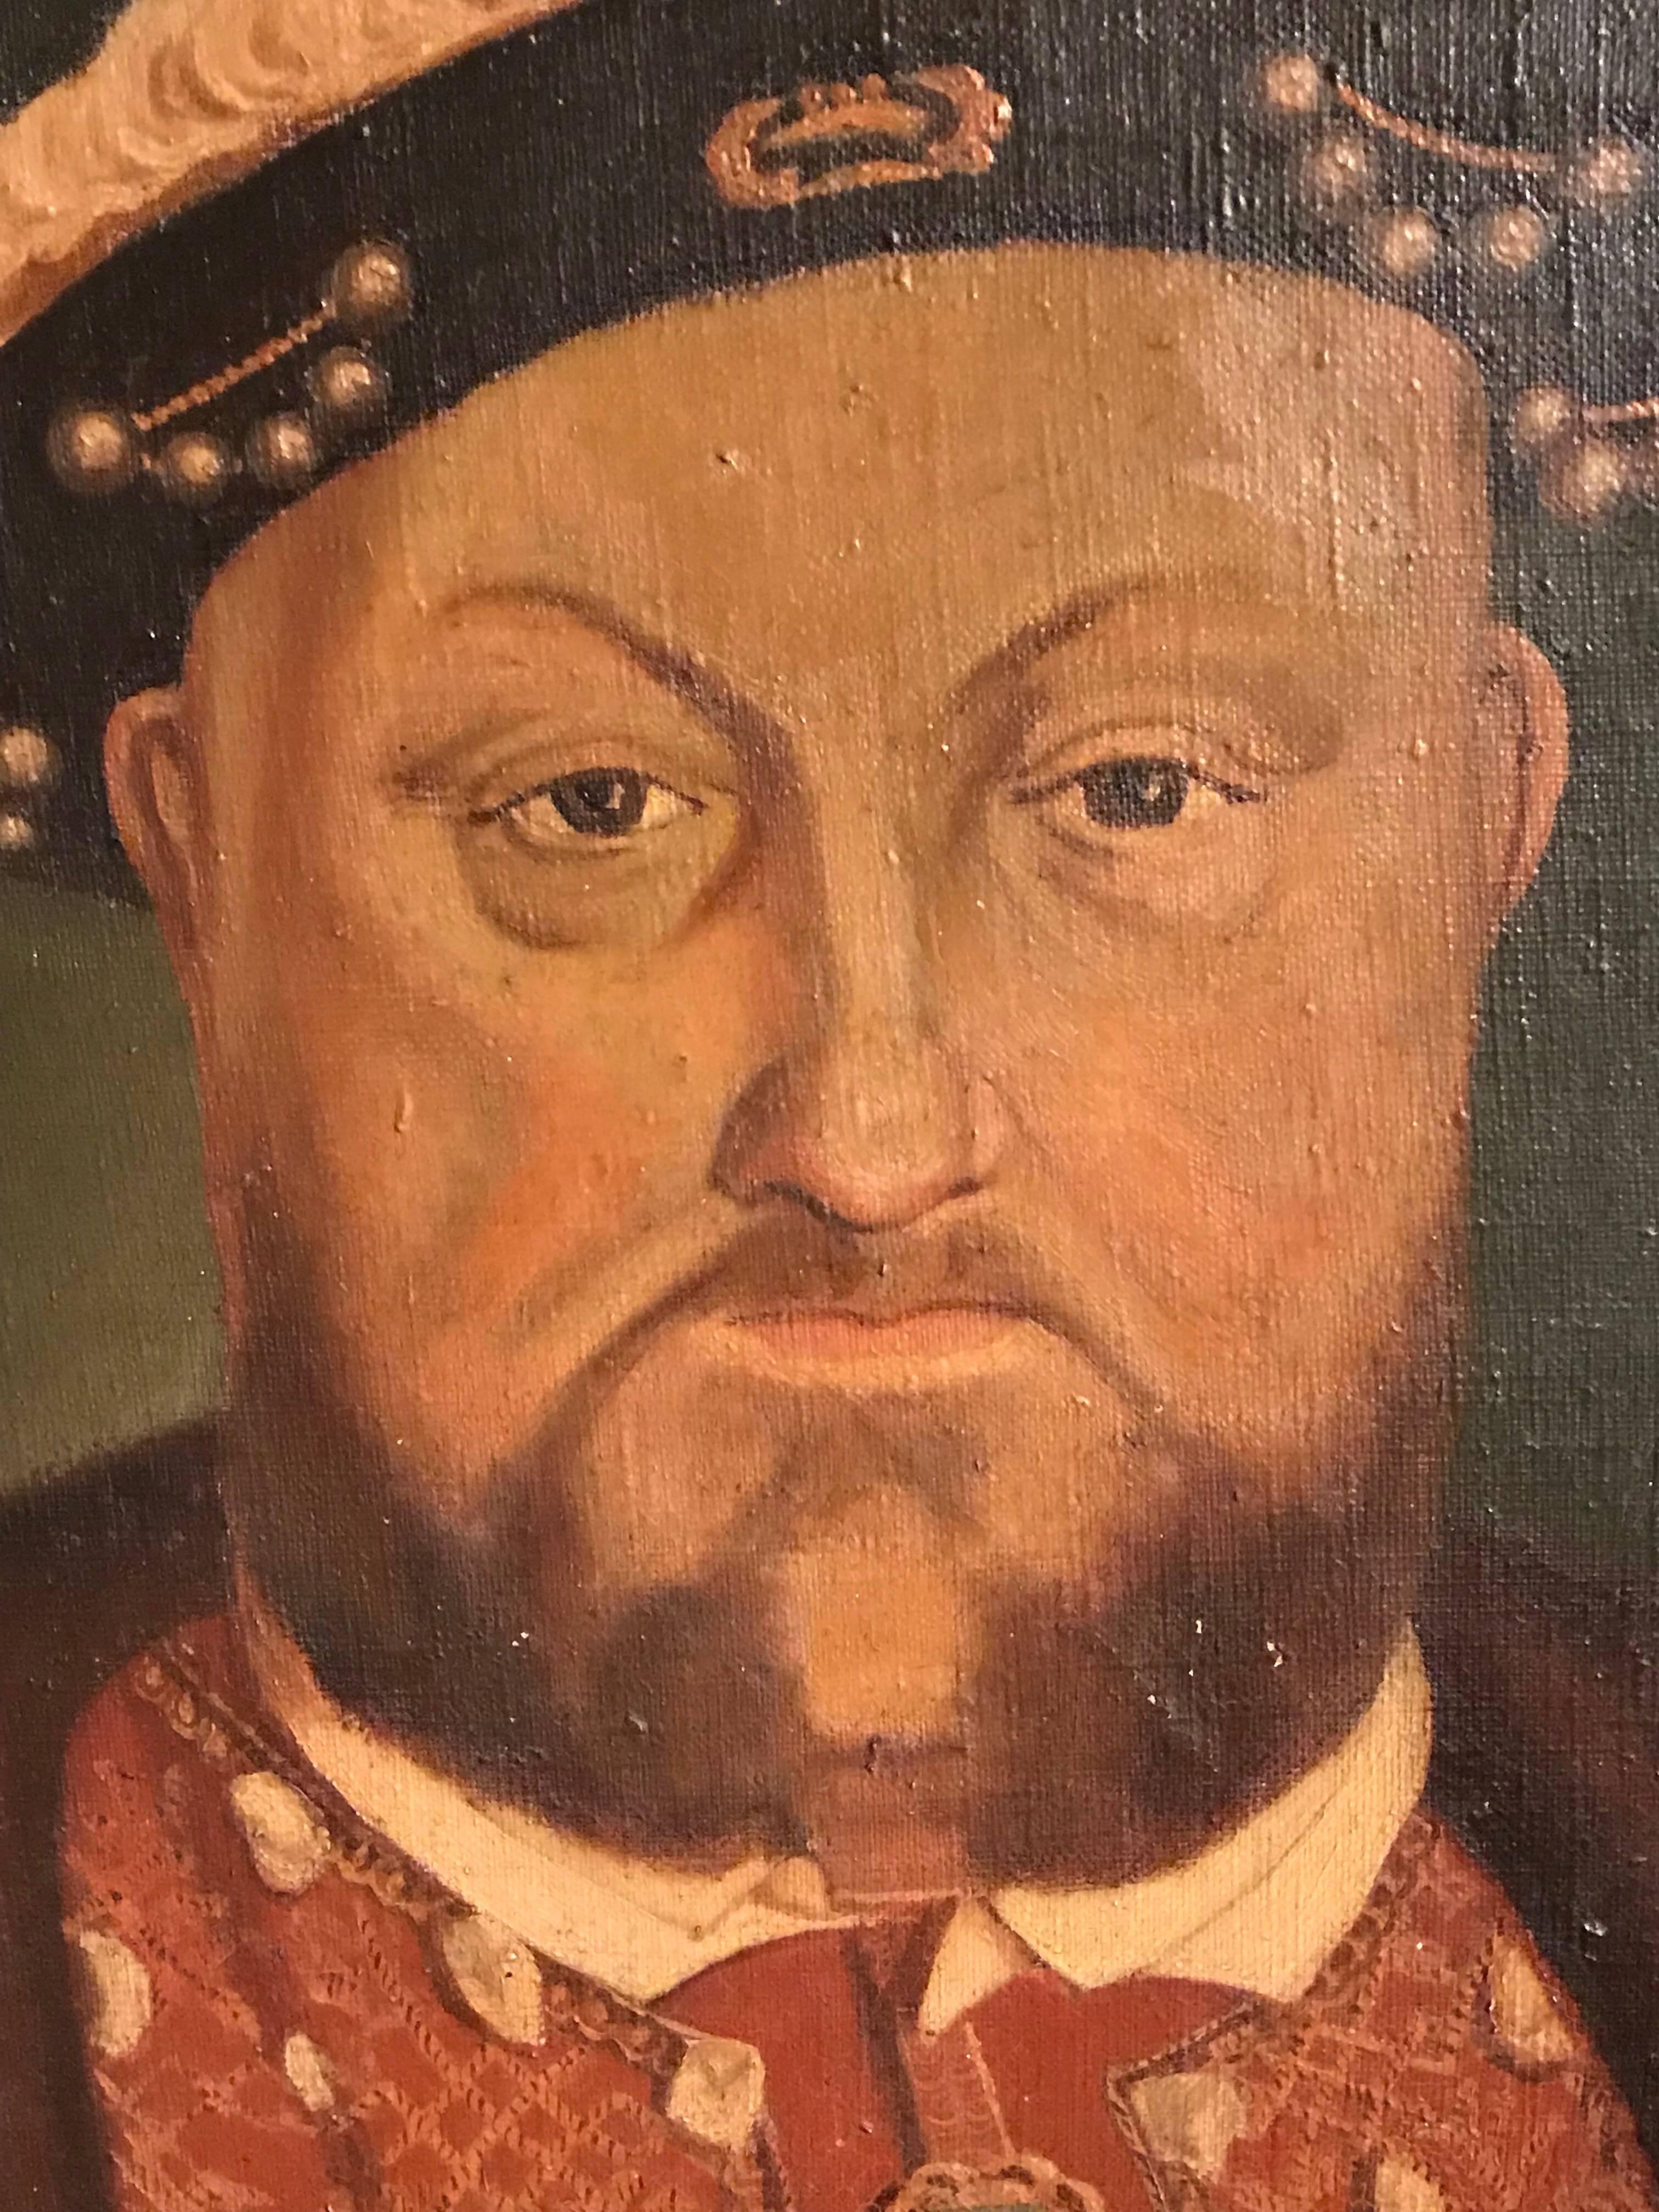 King Henry VIII
English School, early 1900's
oil painting on canvas, framed
canvas: 49cm x 39cm

Henry VIII (28 June 1491 – 28 January 1547) was King of England from 21 April 1509 until his death. Henry was the second Tudor monarch, succeeding his